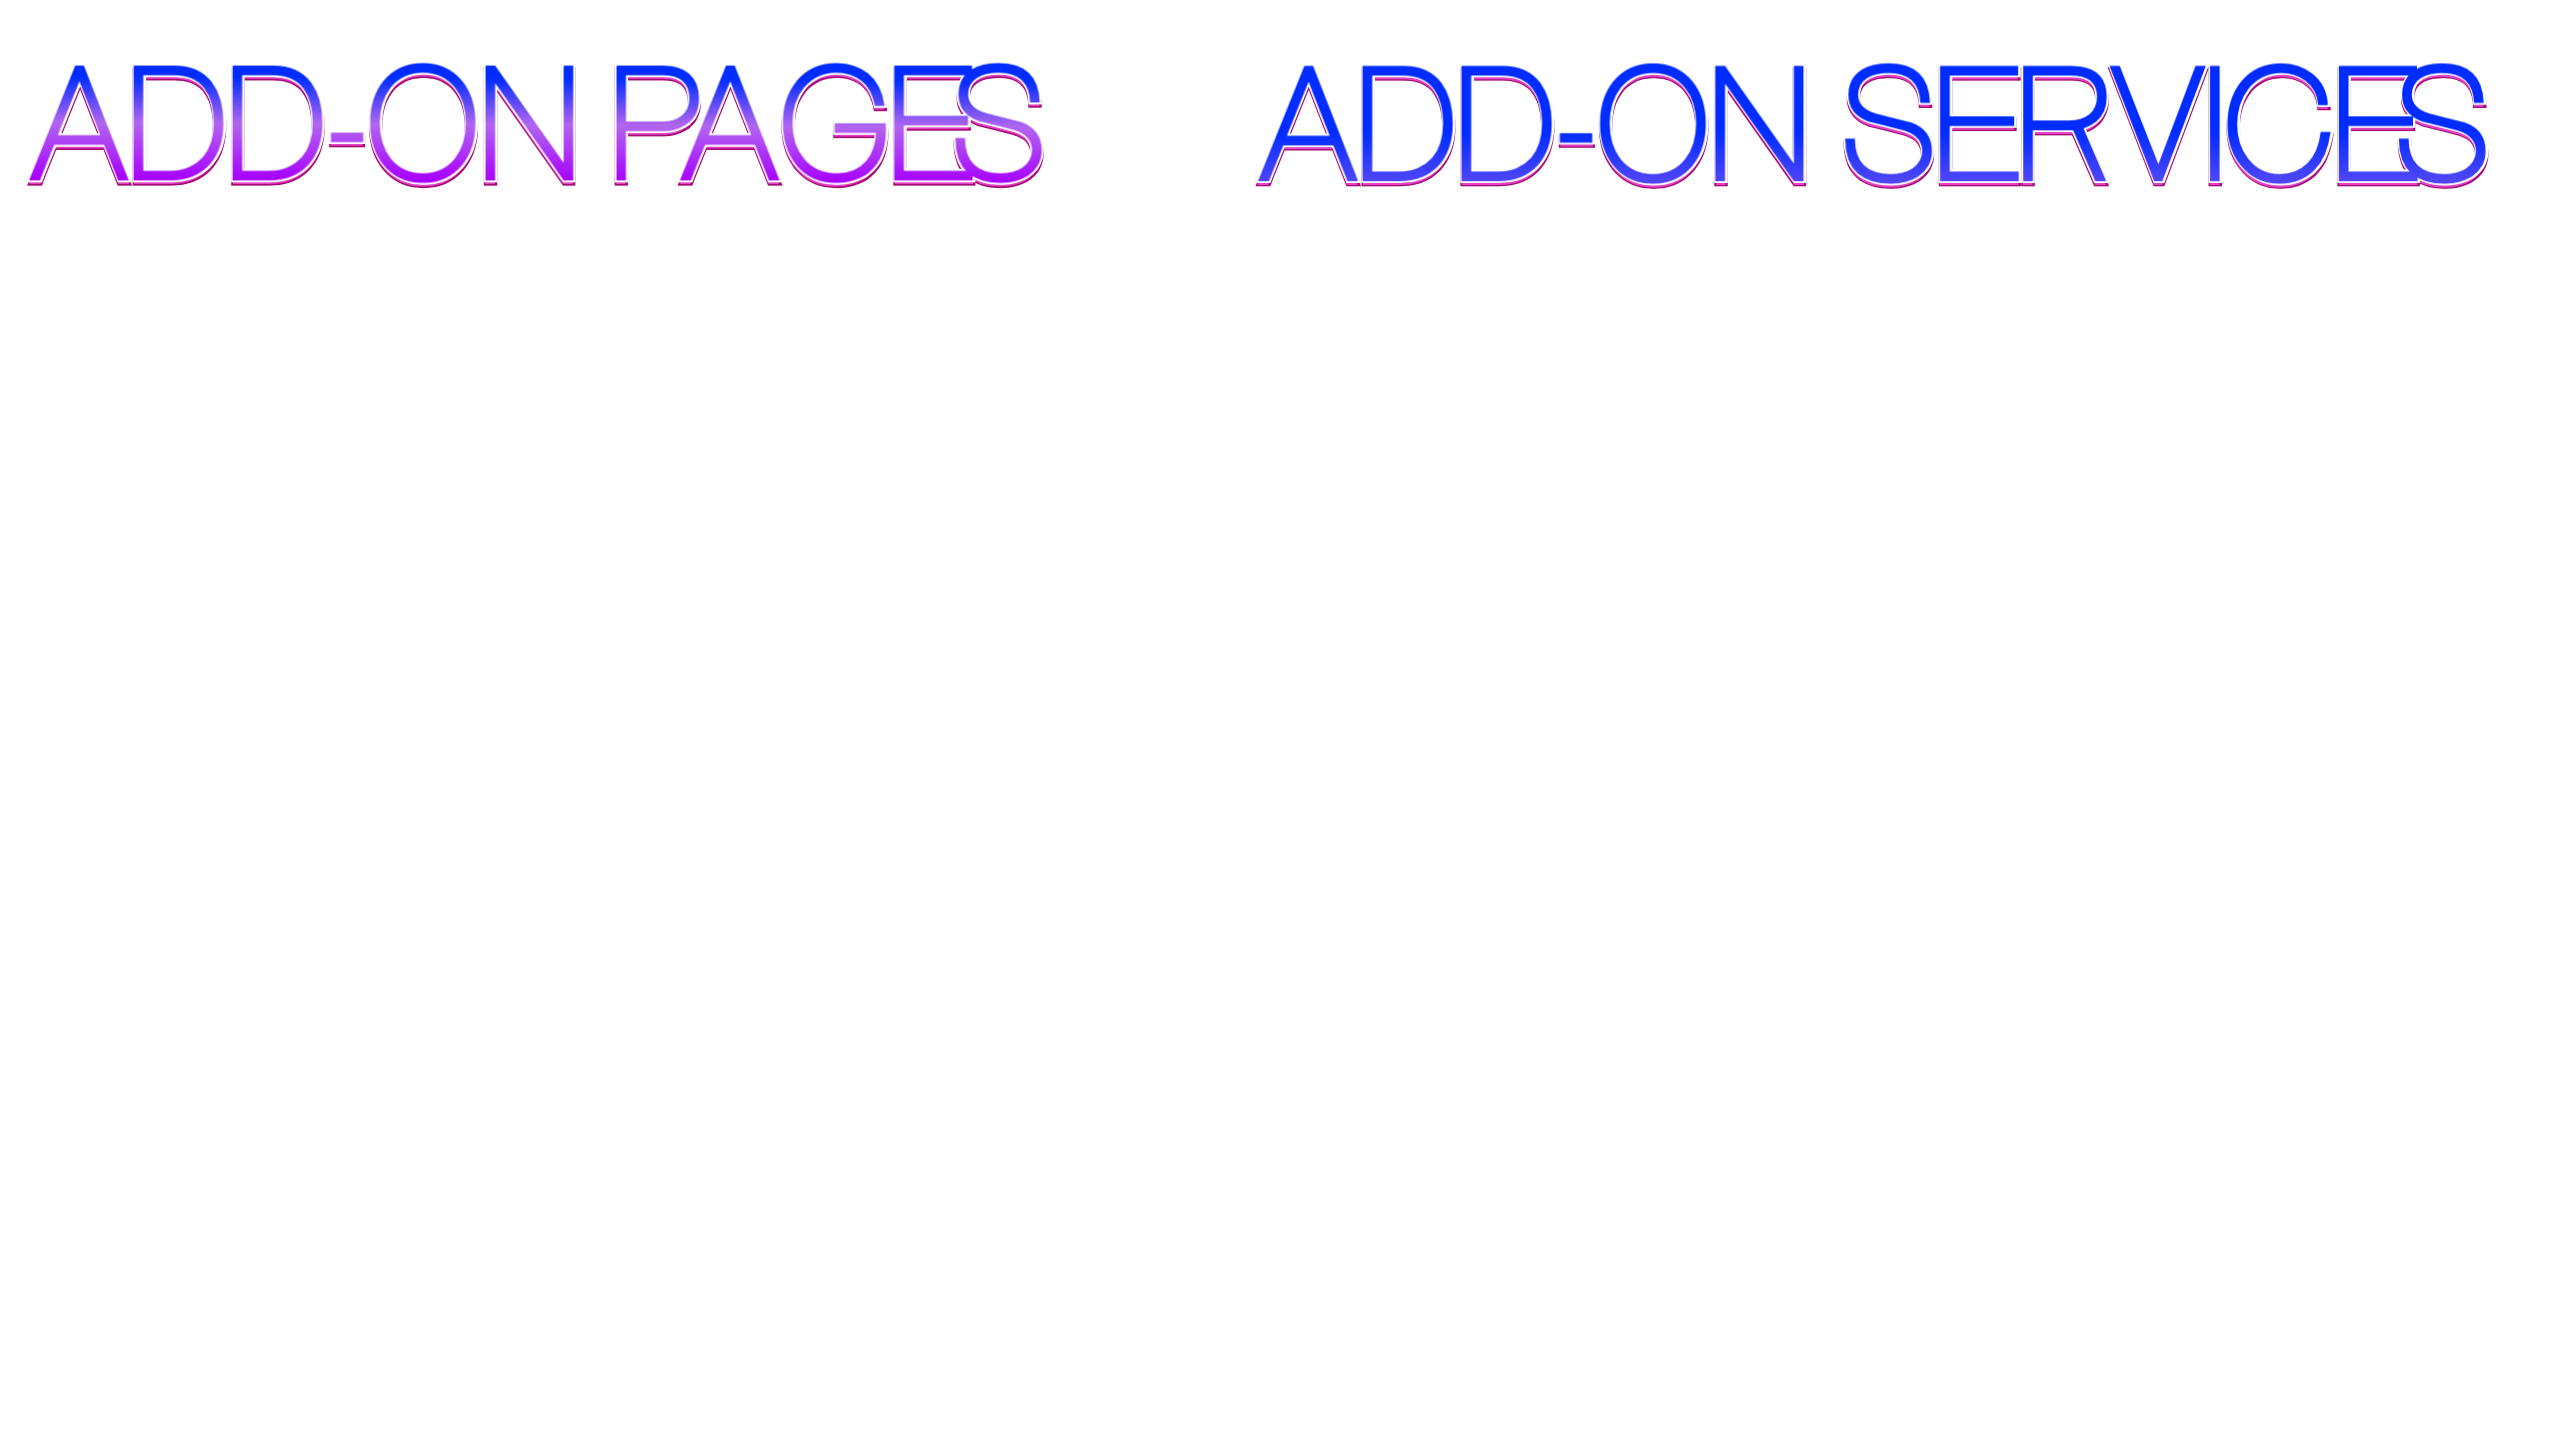 
                Add-on pages
                -Appointment/Consultation Booking Page $80
                -Privacy Police, Terms & Conditions $10 each
                -Career & Jobs Application Page $80
                -Newsletter Subcription Form $40
                -Blog/Article Page $75 per year
                Up to 4 posts per week
                -Portfolio Page
                Up to 5 pictures with description $25
                Up to 10 pictures with description $40
                Up to 25 pictures with description $75
                -Product/Service Page
                Up to 5 products $40
                Up to 10 products $75
                Up to 20 products $140
                Up to 30 products $200
                Services
                -Product & Service Photos
                (Jacksonville, St.Augustine, Palm Coast, Daytona Beach, Orlando)
                $40/hour 2 hour minimum
                Includes up to 5 edited high quality digital photos per product/service

                -Company Welcome Video
                (Jacksonville, St.Augustine, Palm Coast, Daytona Beach, Orlando)
                $50/hour 2 hour minimum
                Edited high definition welcome video for About or Home Page
                (up to 6 minutes)

                -Custom Logos
                1 unique logo $20
                3 unique logos $60